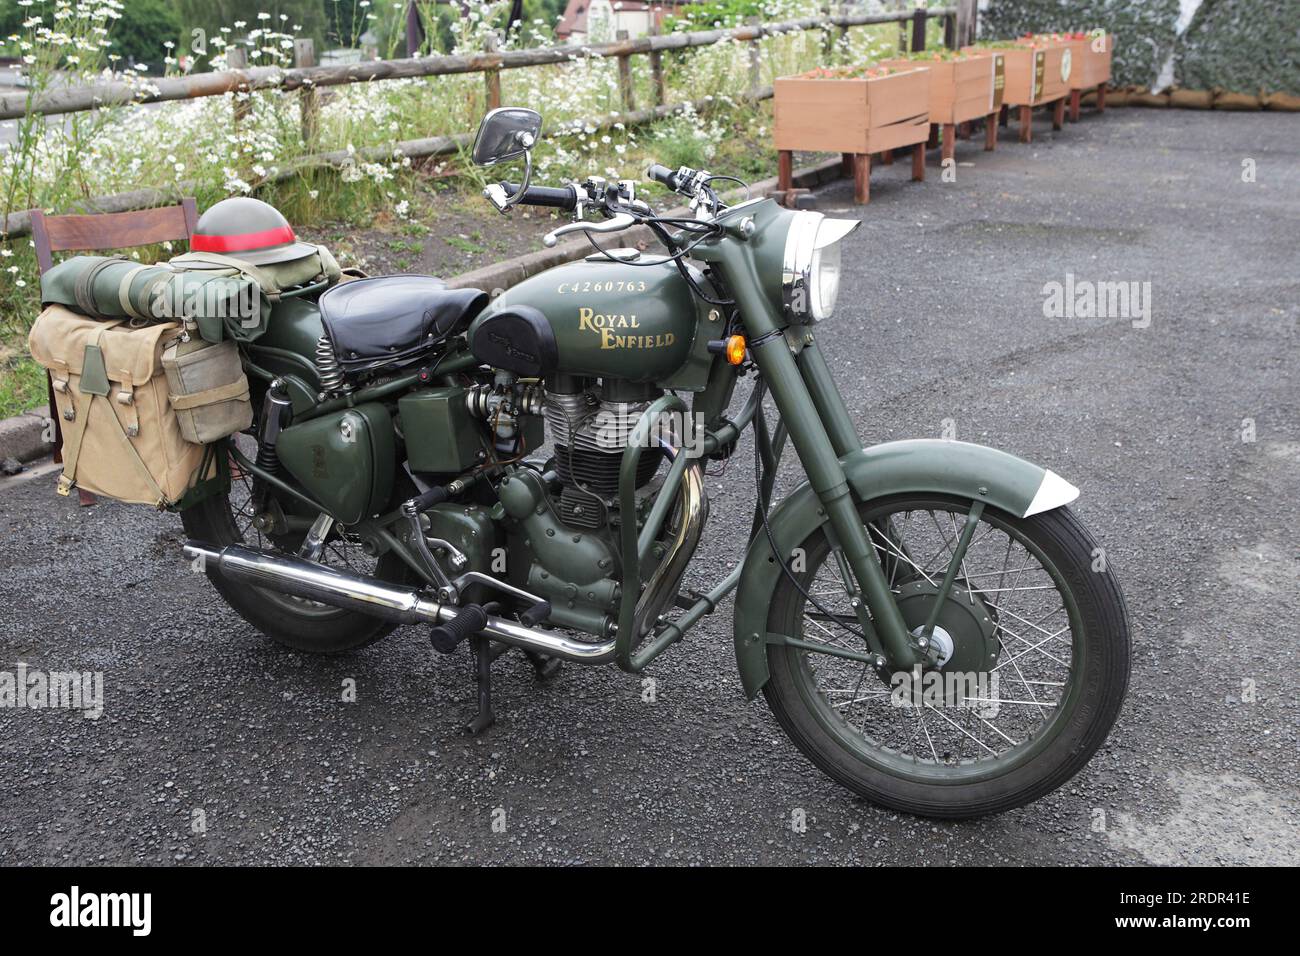 A fine example of a Royal Enfield Military Motorcycle, proudly displayed at the Severn Valley Railway 1940s Day. Stock Photo